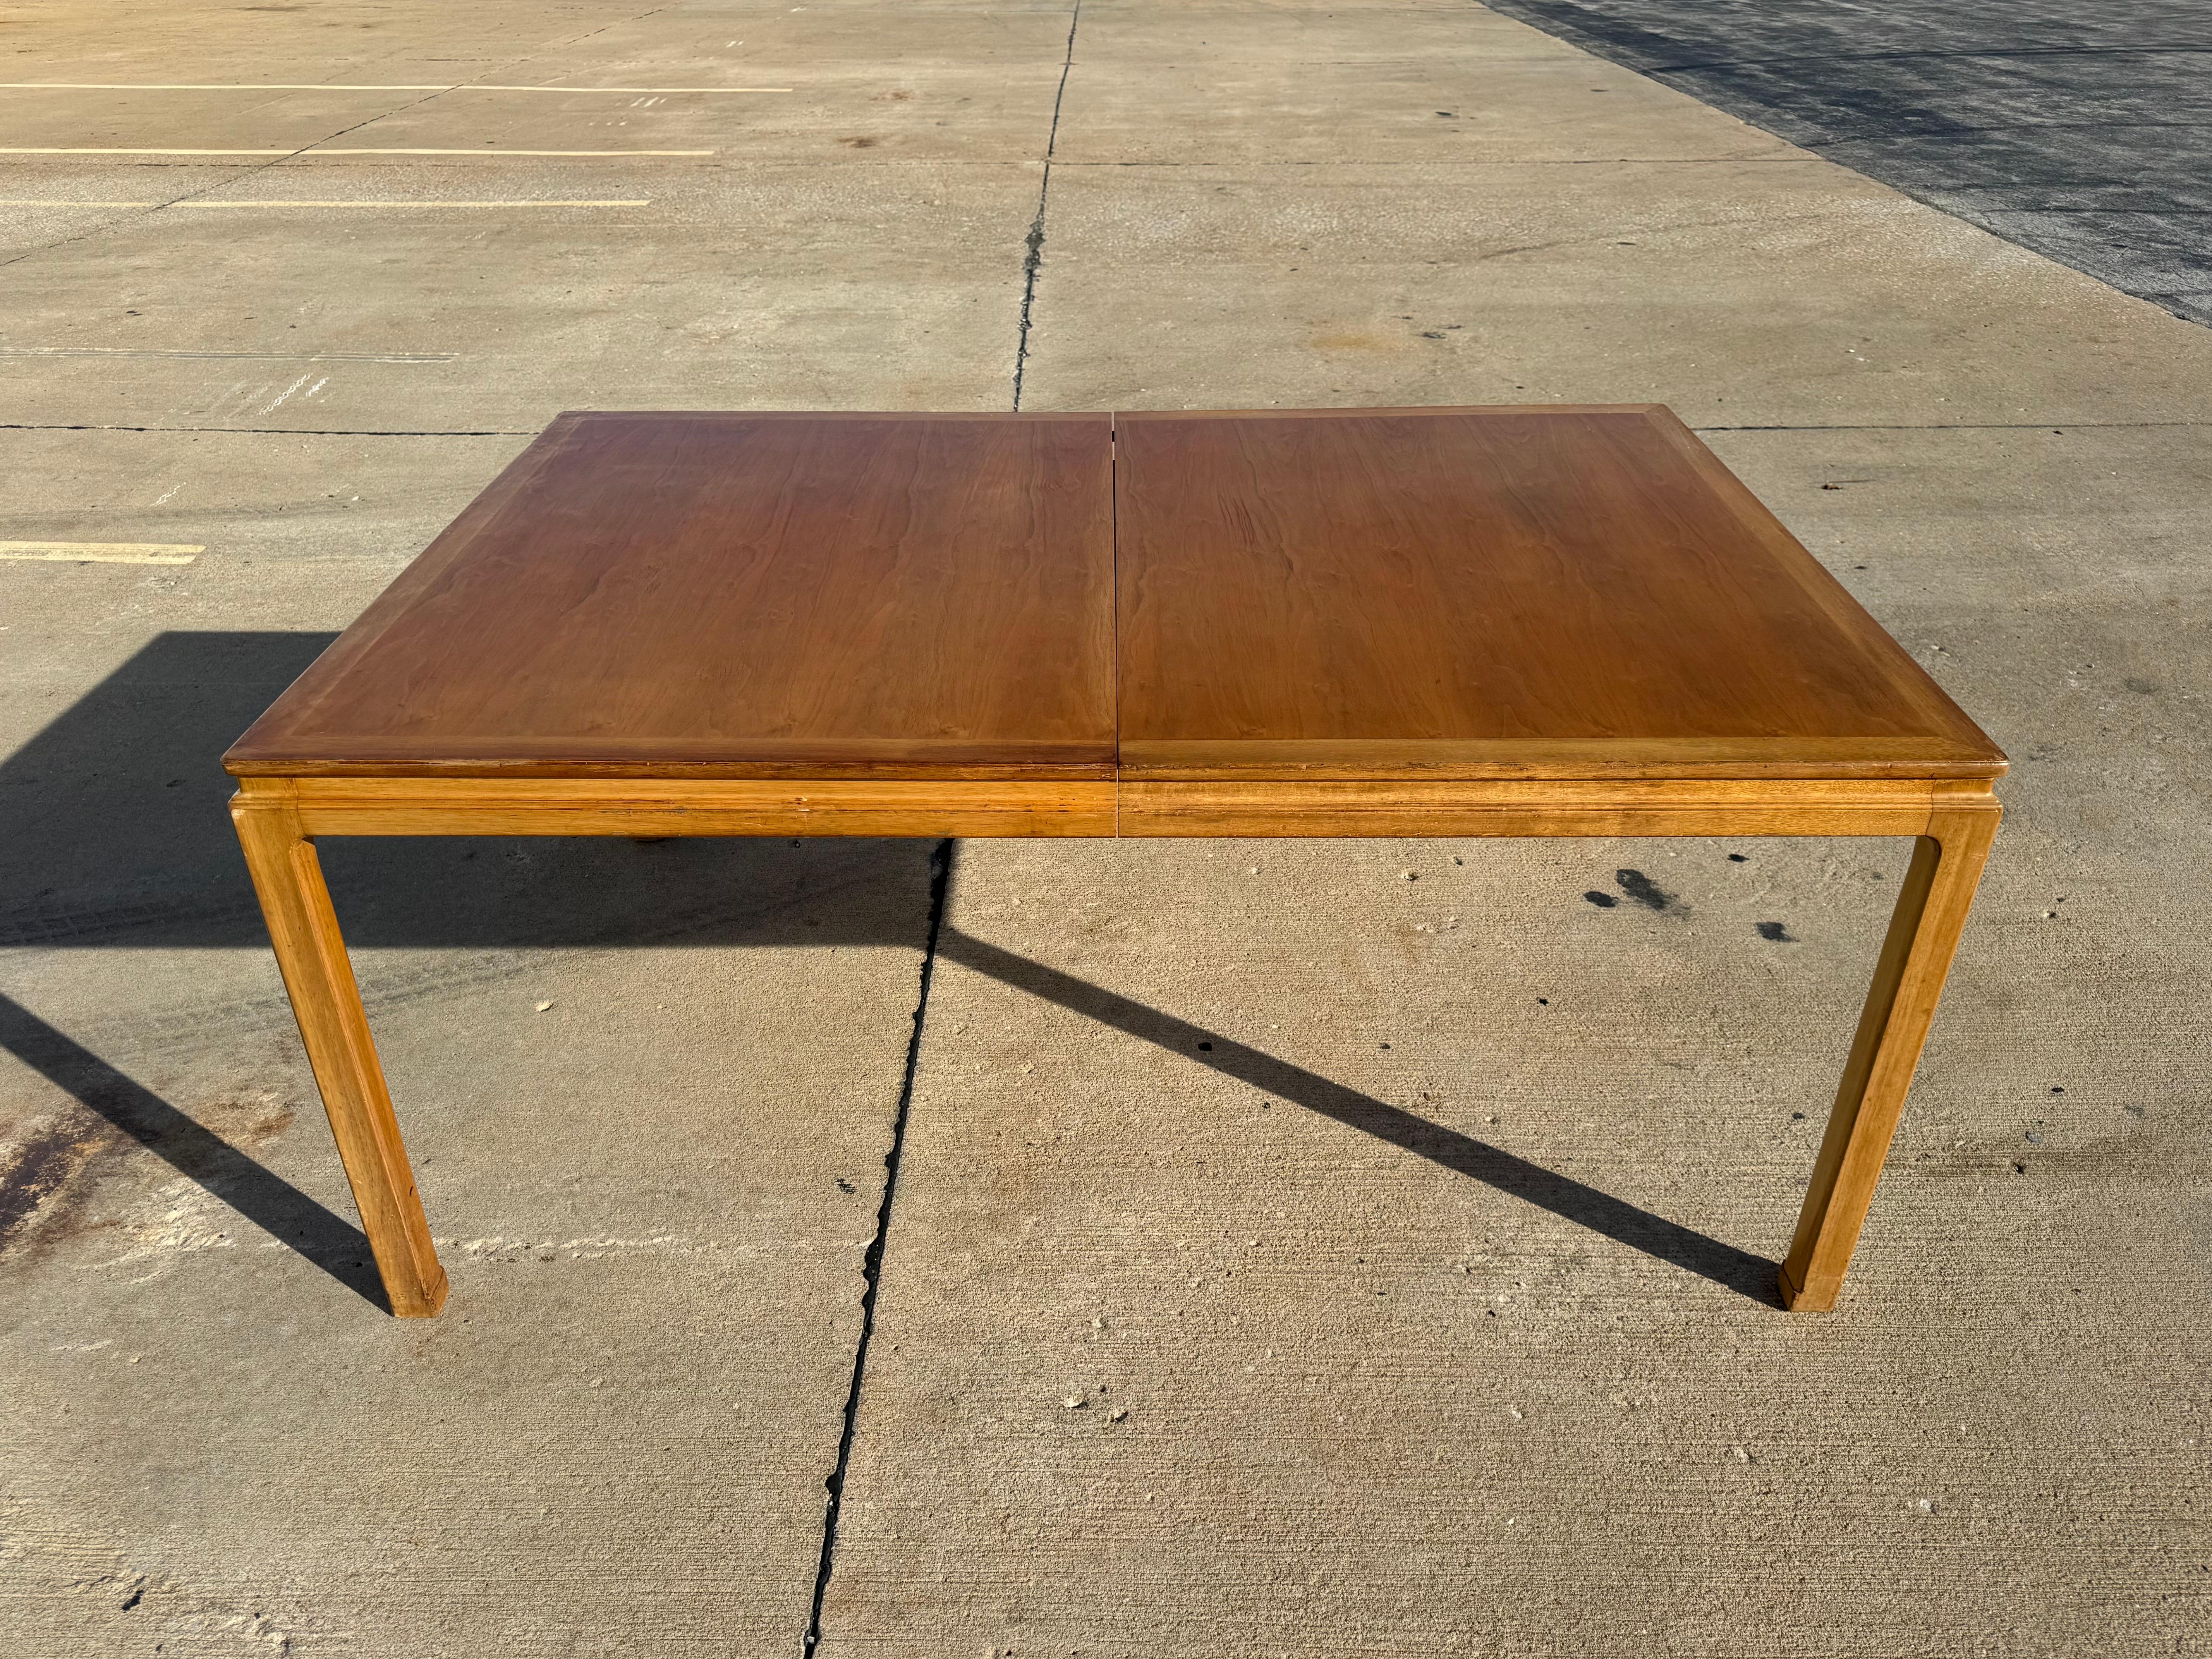 Edward Wormley - Dunbar for Modern large Asian influenced Mid-Century extension dining table, shown in original bleached mahogany frame with contrasting book matched walnut veneer top. This table has two 24